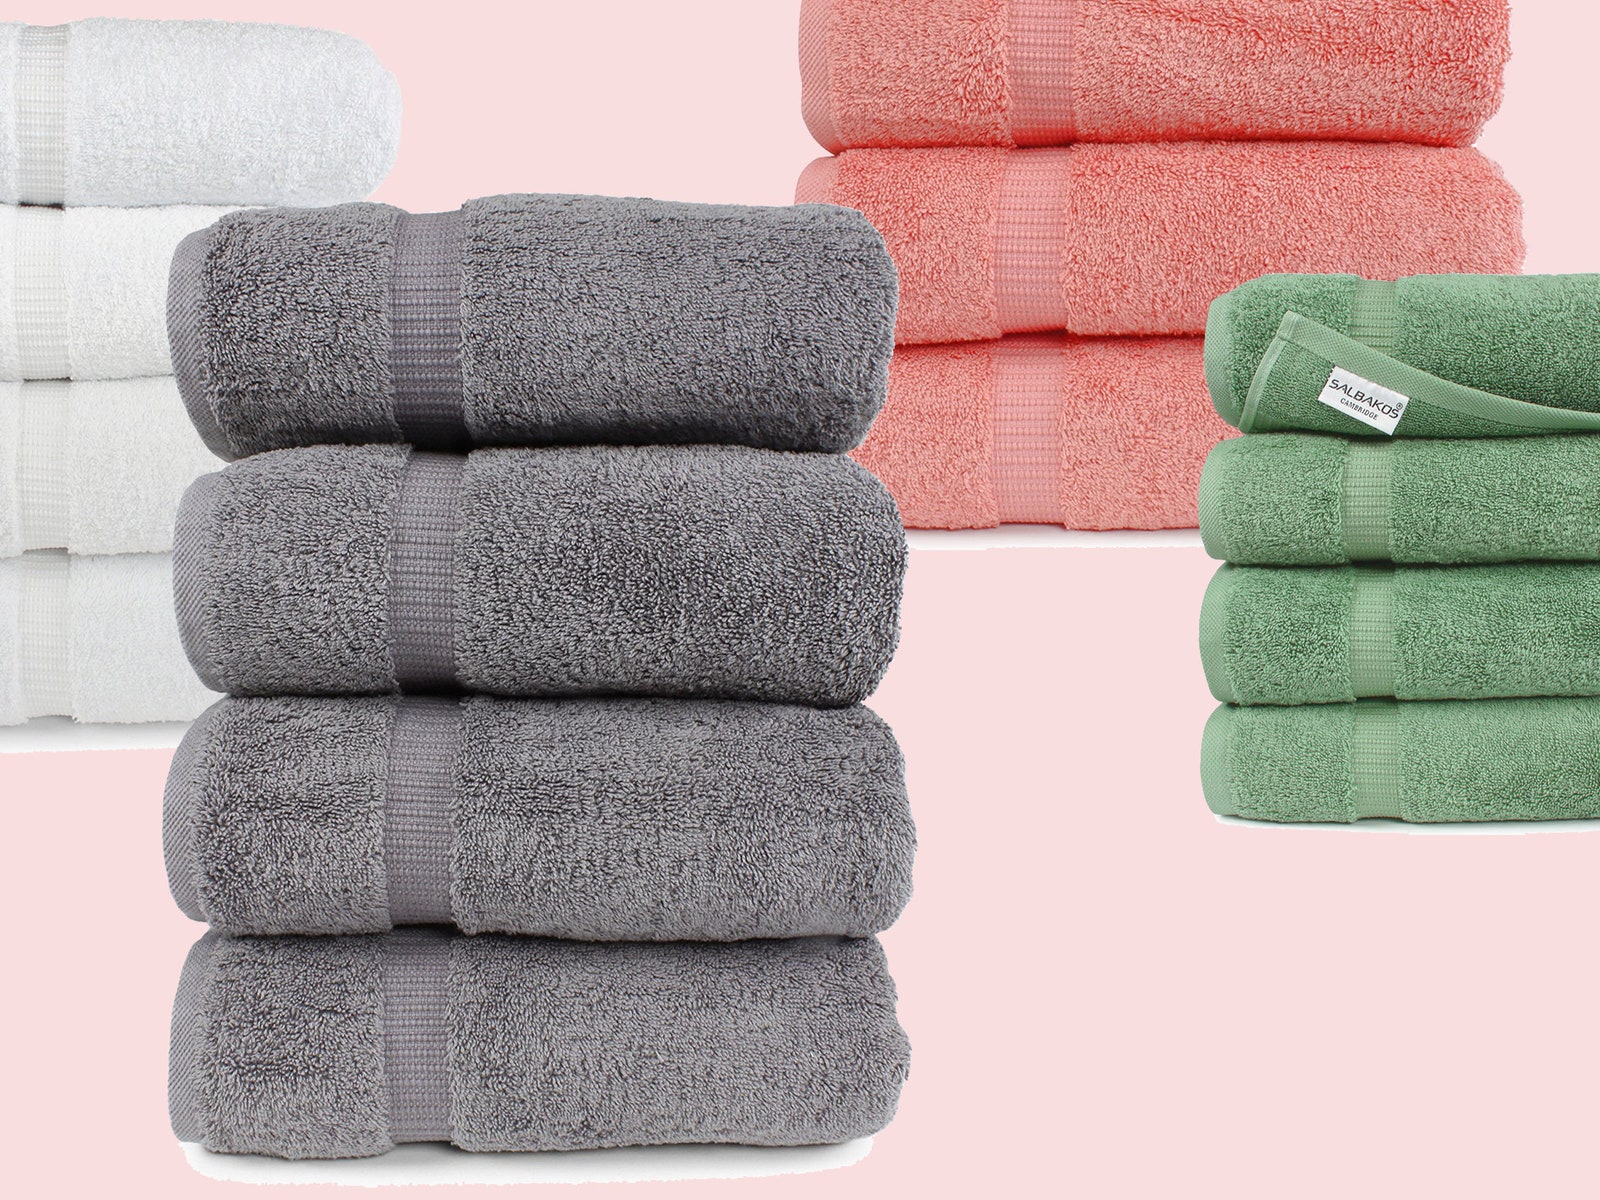 14 Best Bath Towels on Amazon, According to More Than 20,000 Reviewers